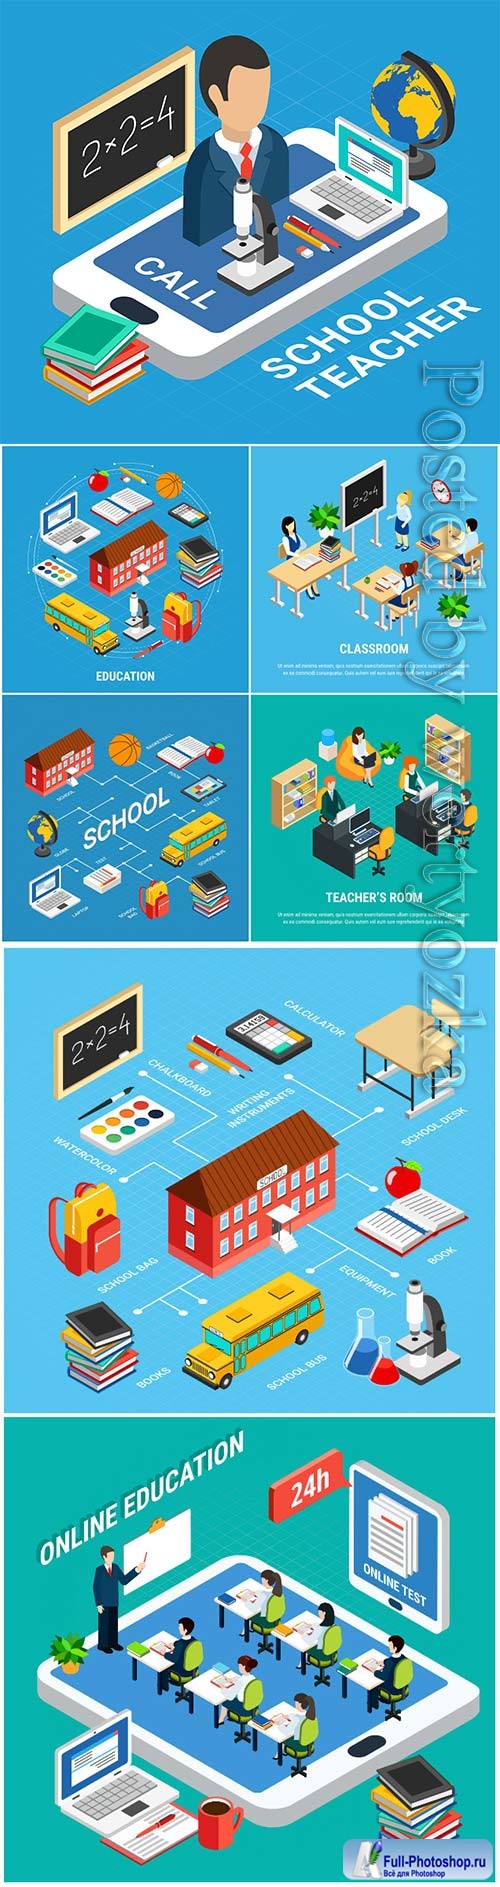 Isometric education illustration with school teacher and devices